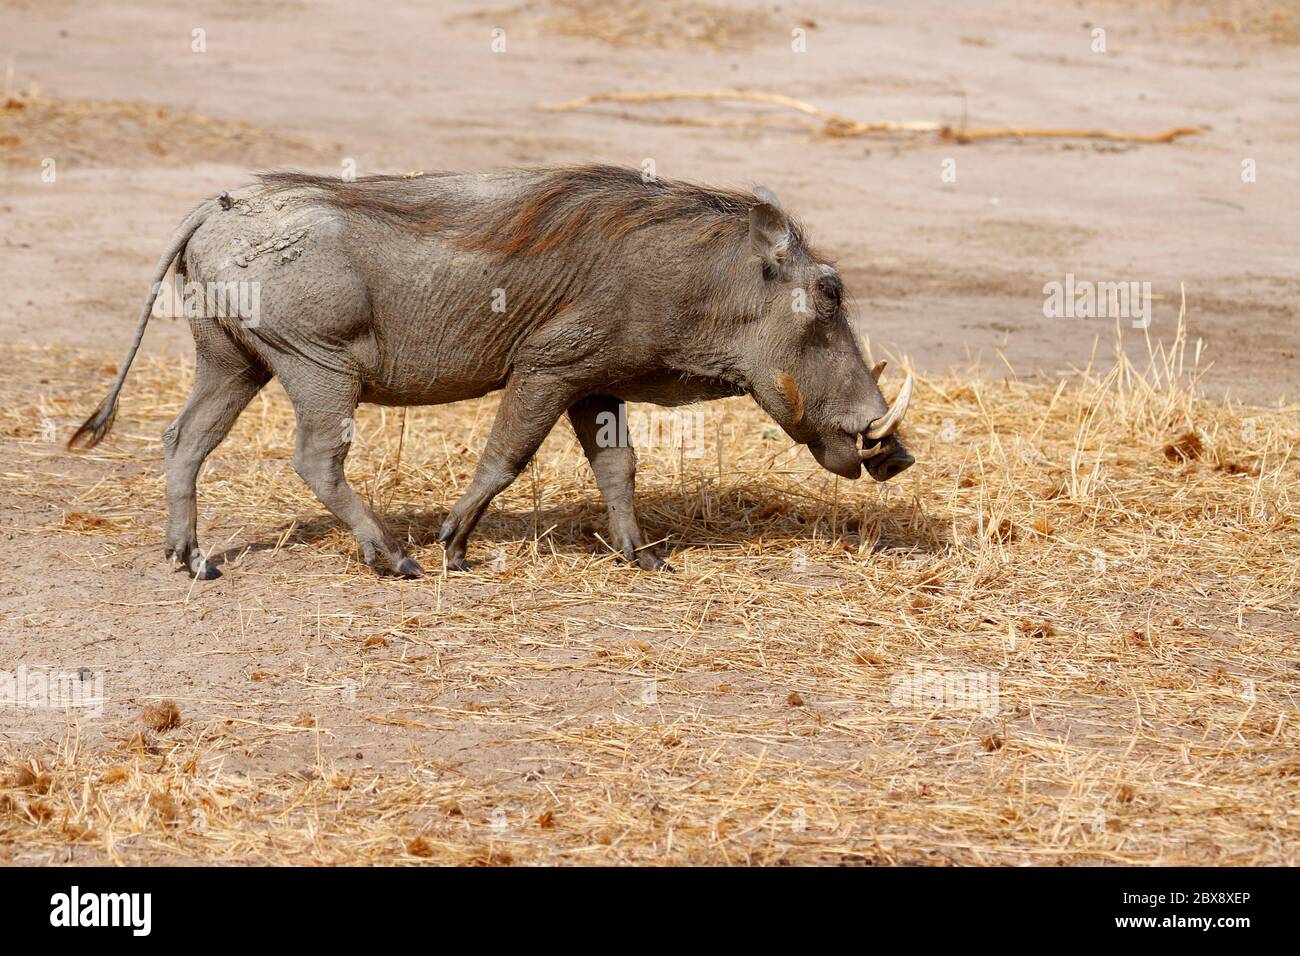 Common Warthog wandering out in the early morning Stock Photo